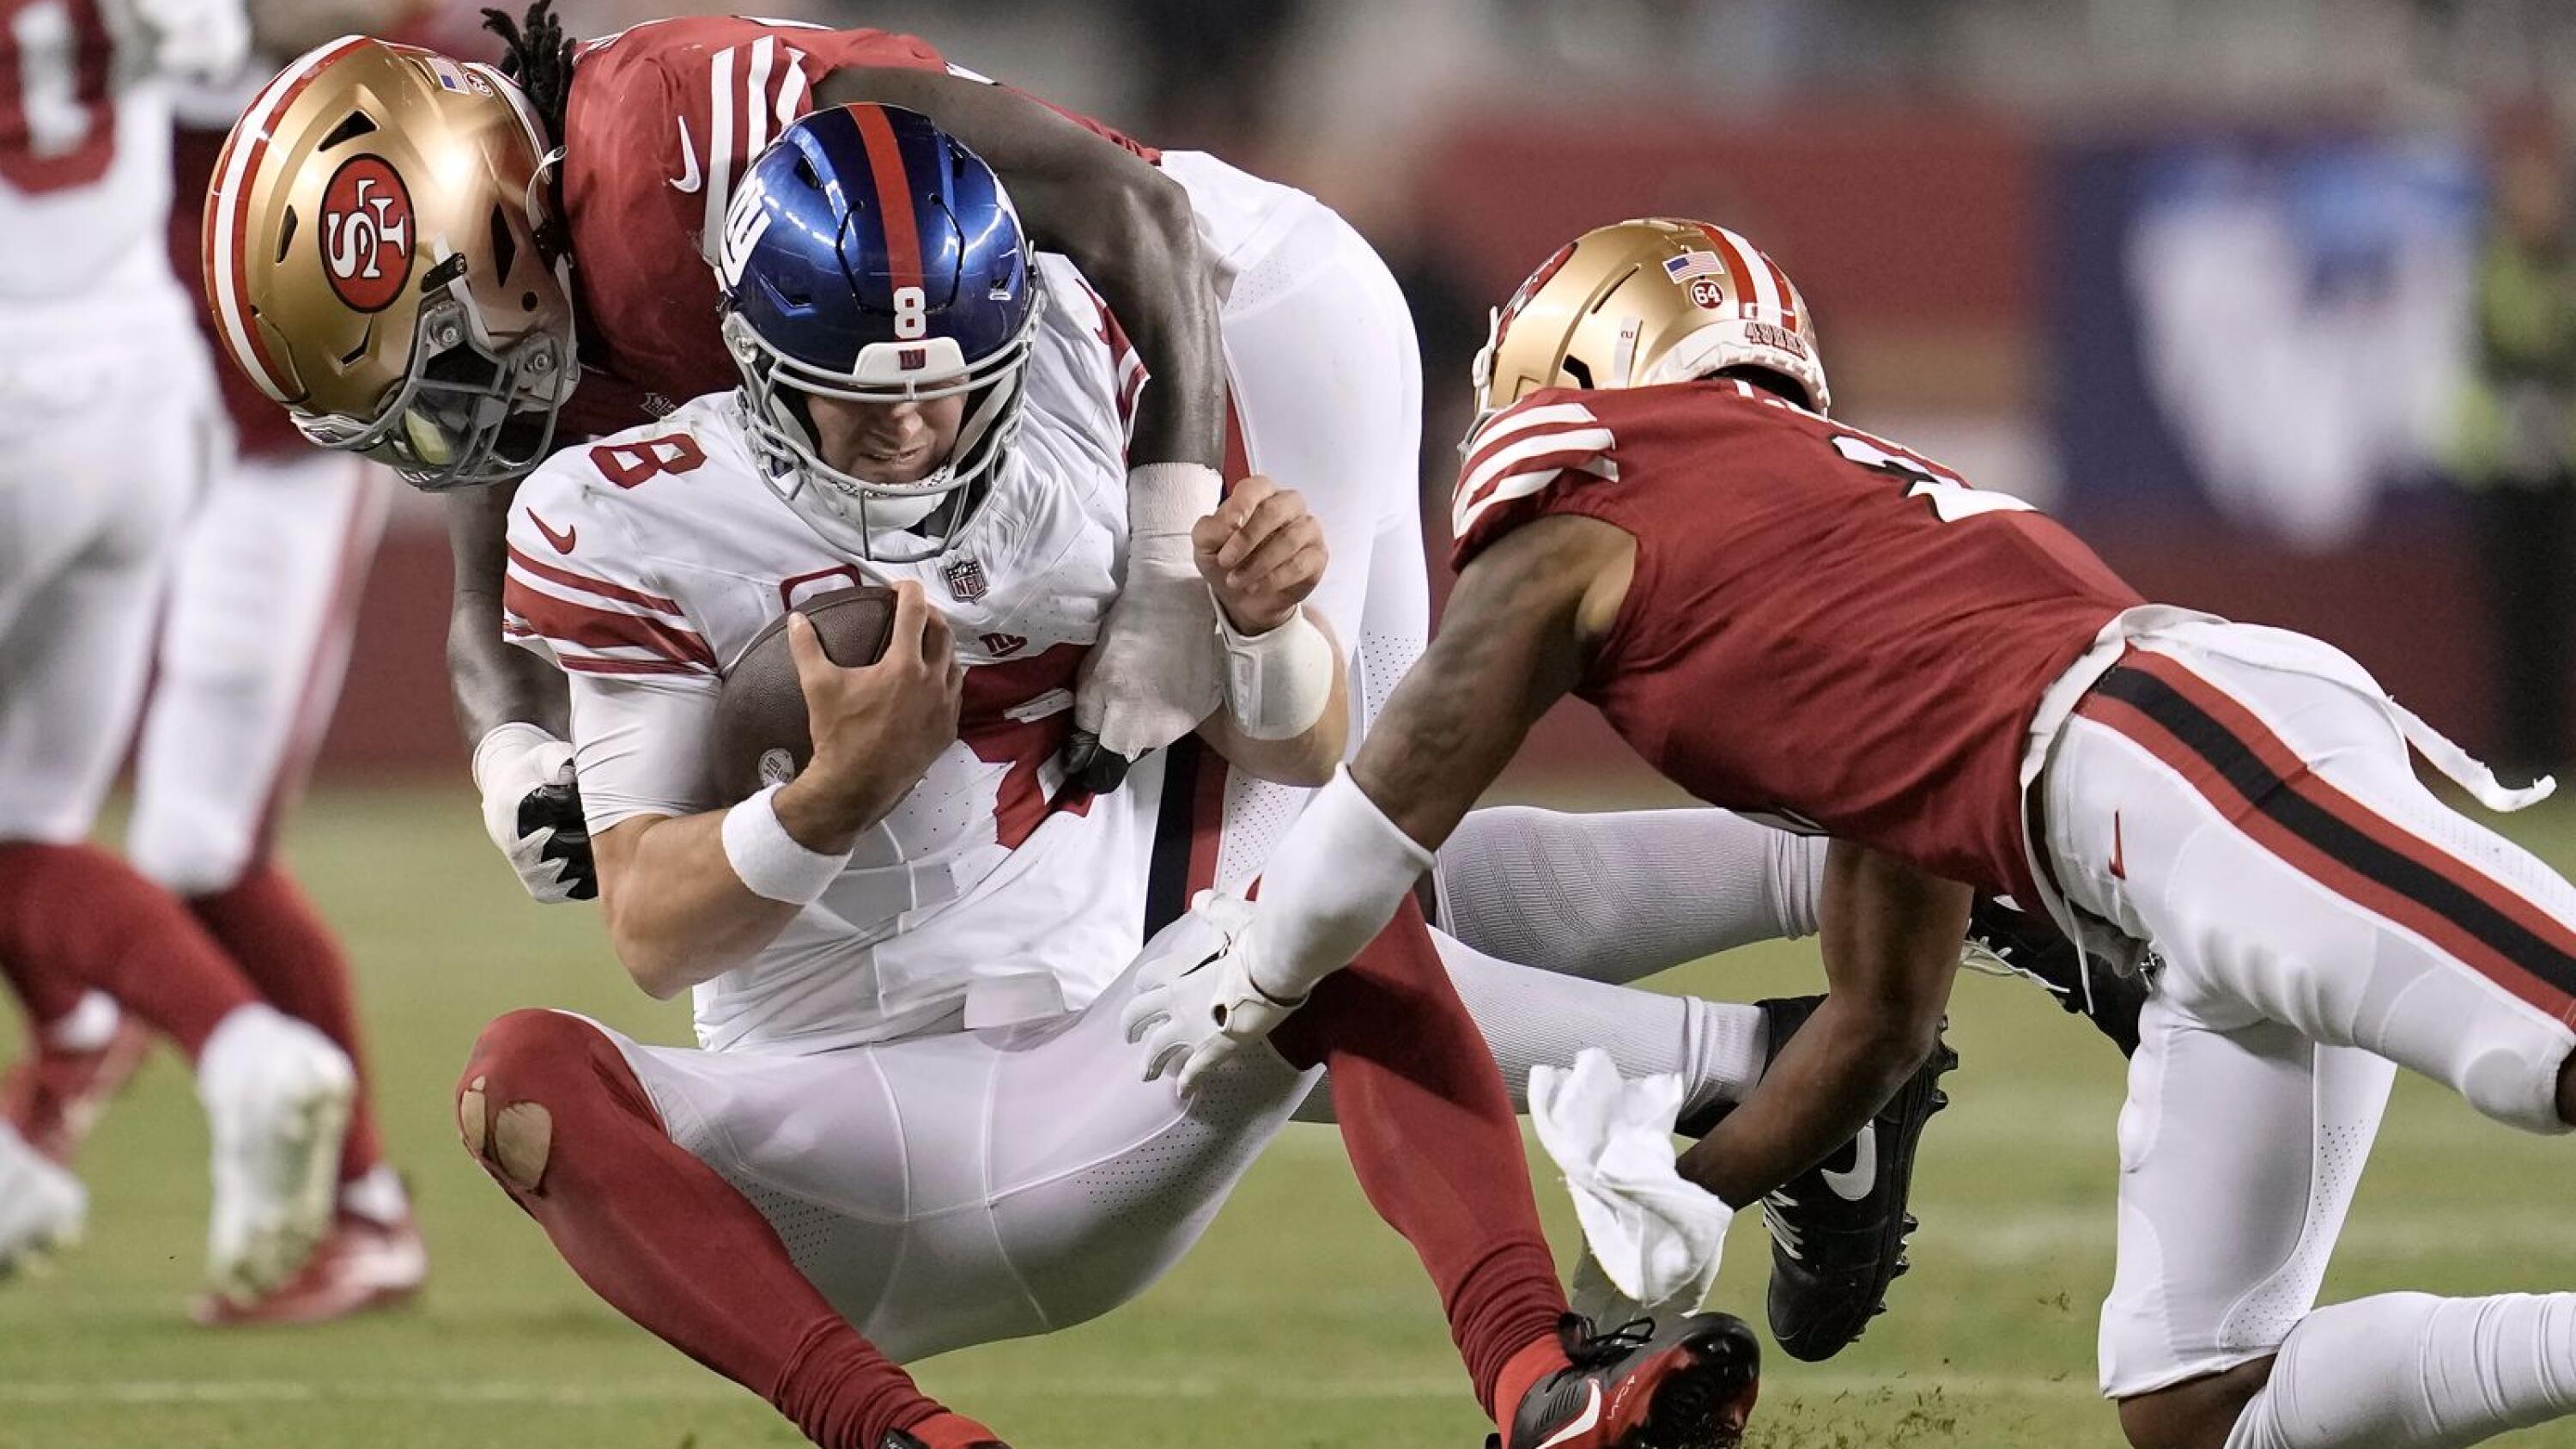 New York Giants are 1-2 after another lopsided loss, facing a long